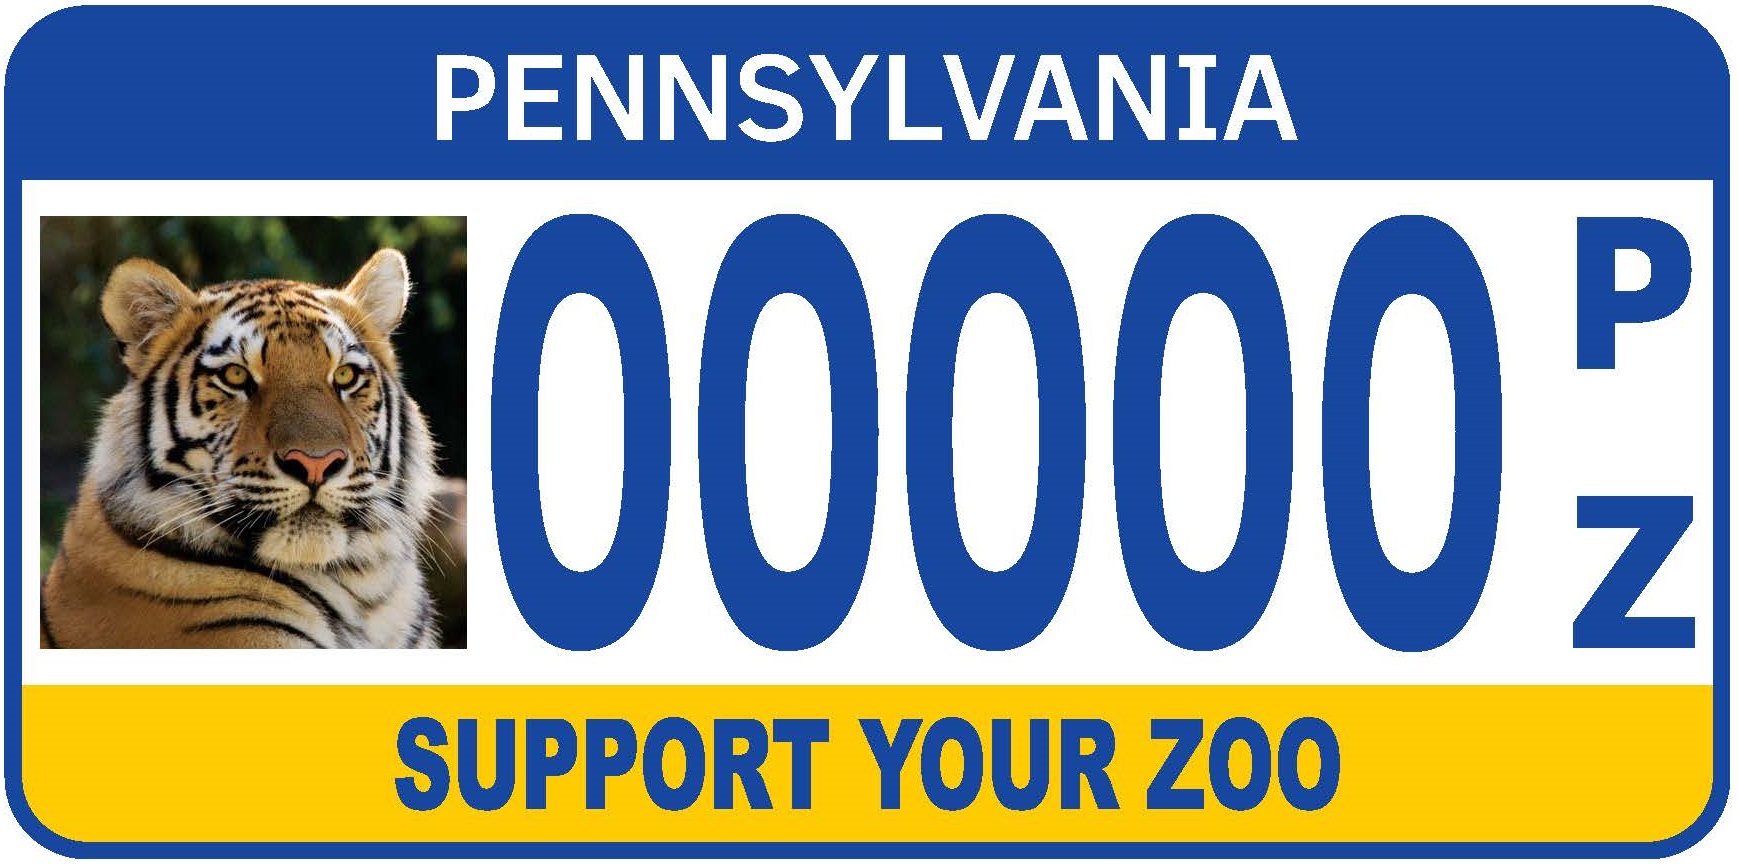 The Pennsylvania Zoological Council License Plate